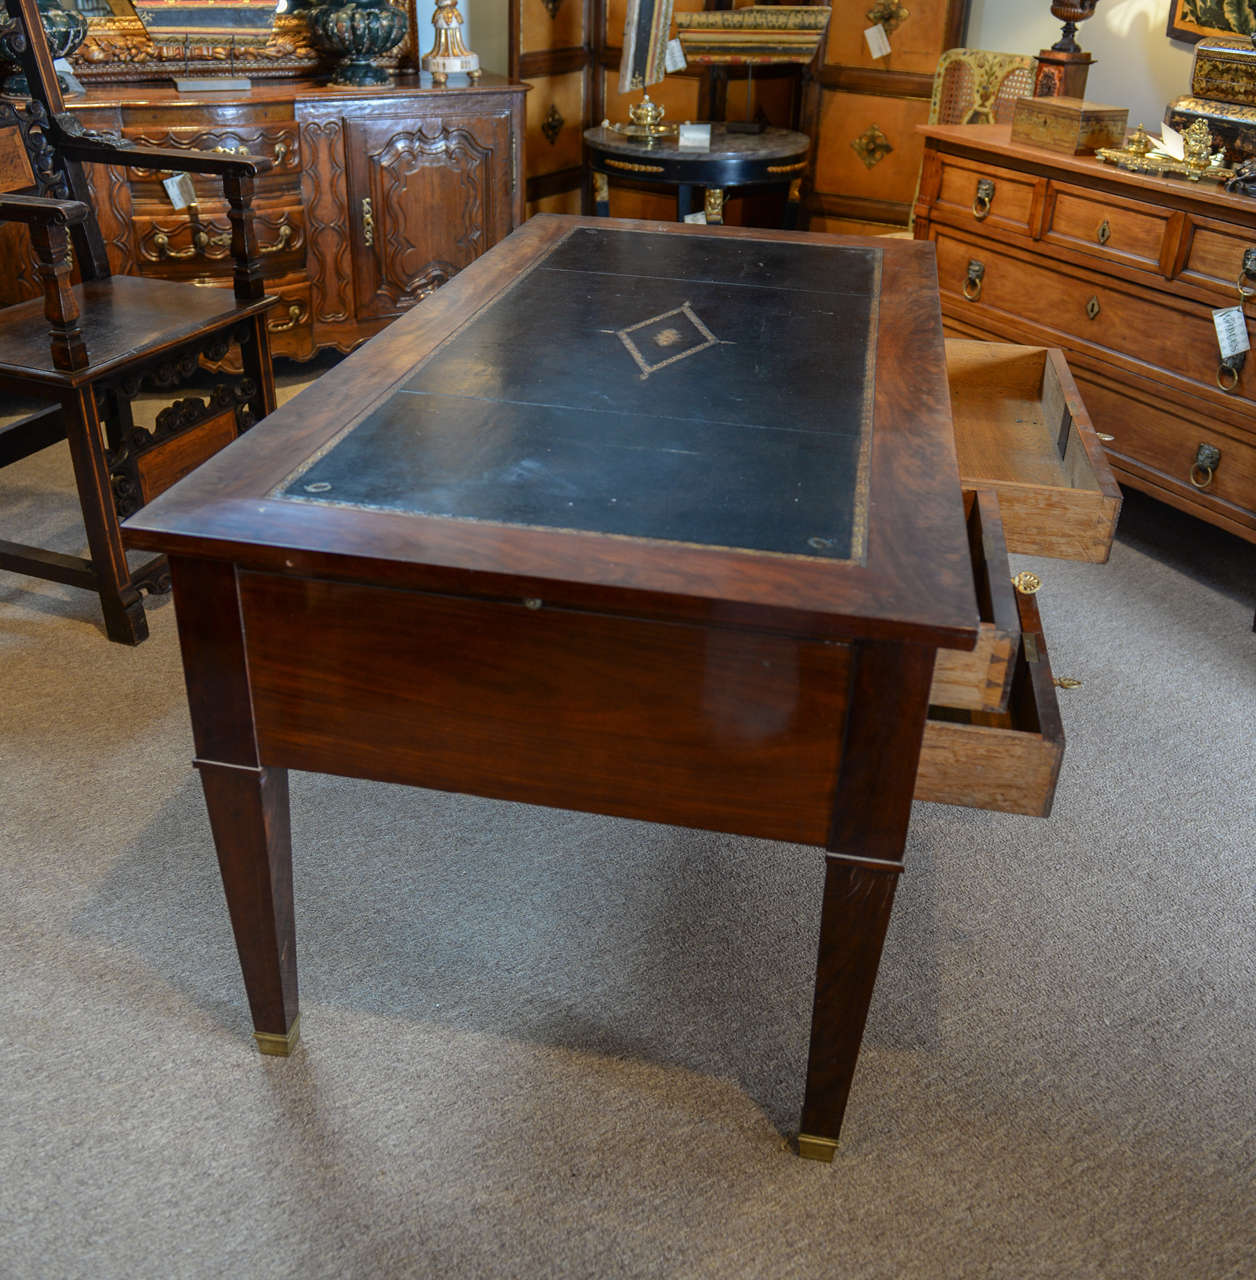 19th Century Period Restoration Desk In Mahogany with Slides at Both Ends